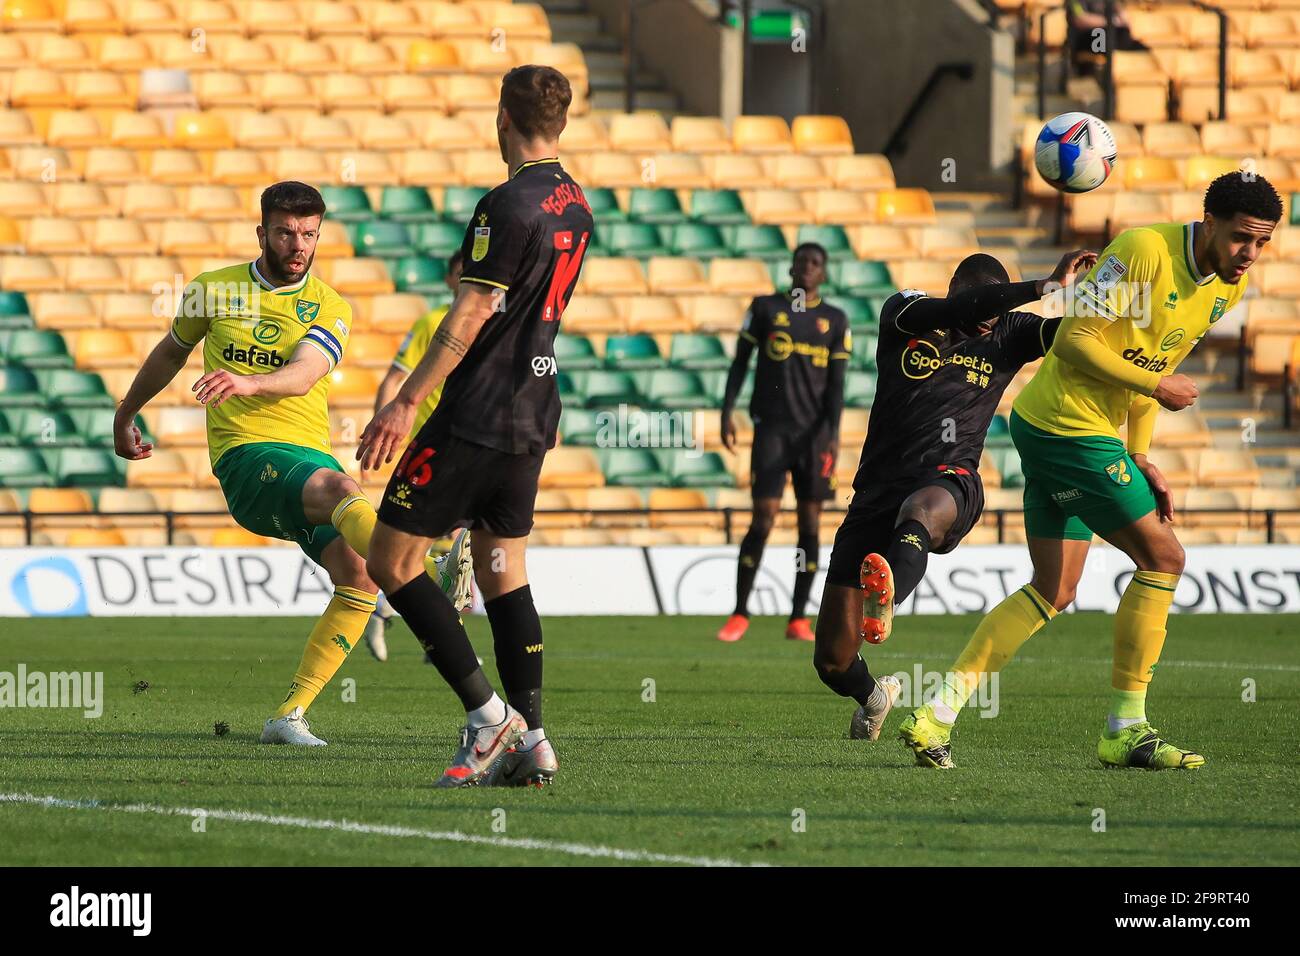 Grant Hanley #5 of Norwich City clears the ball from this area Stock Photo